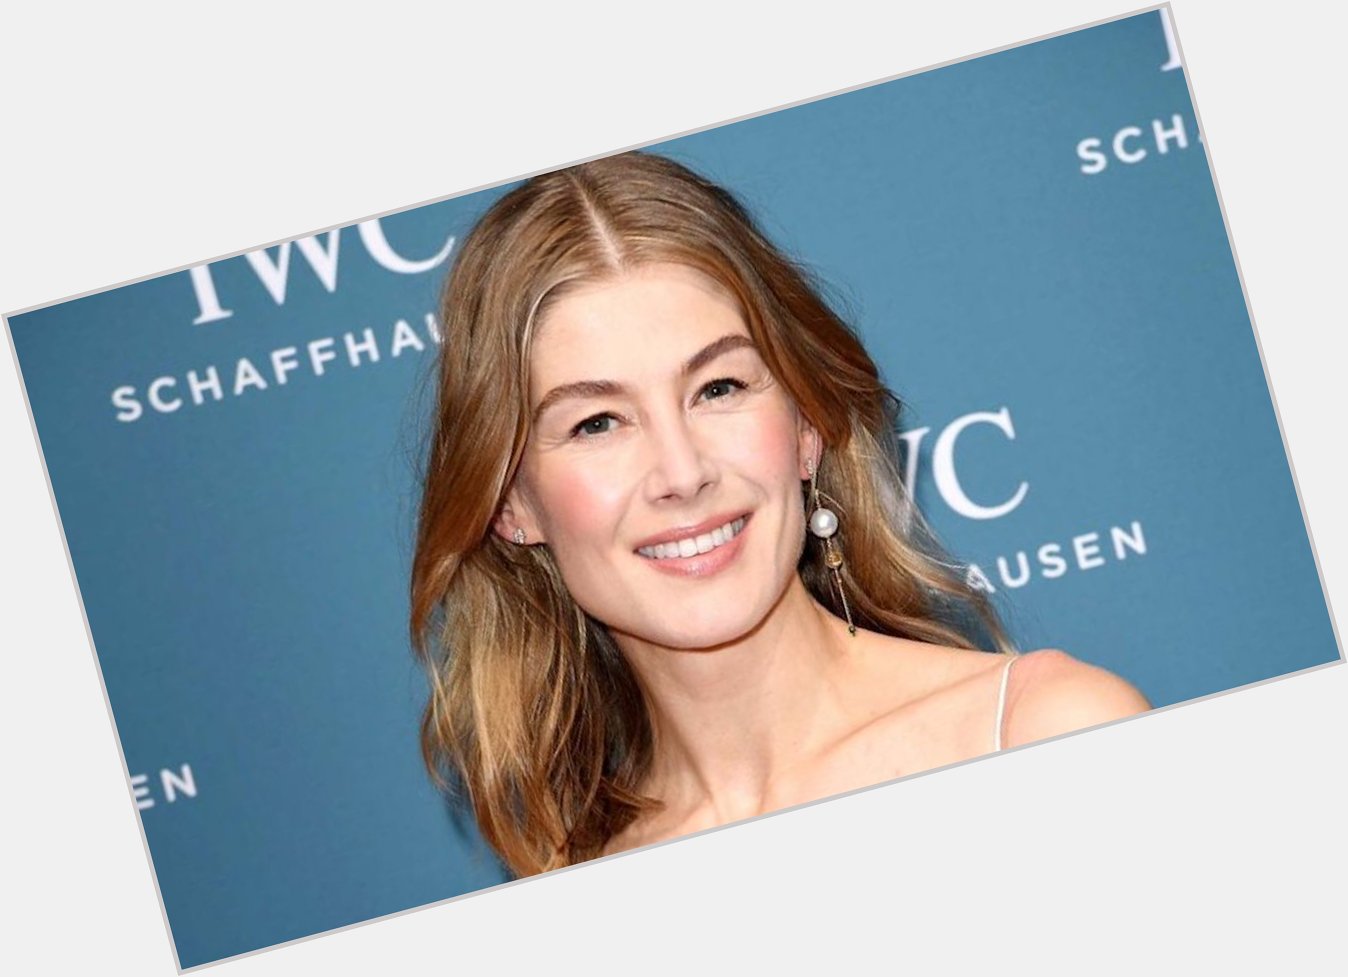 Happy Birthday Rosamund Pike.  She is 41 today!

.....This reminds me, I have to rewatch soon. 